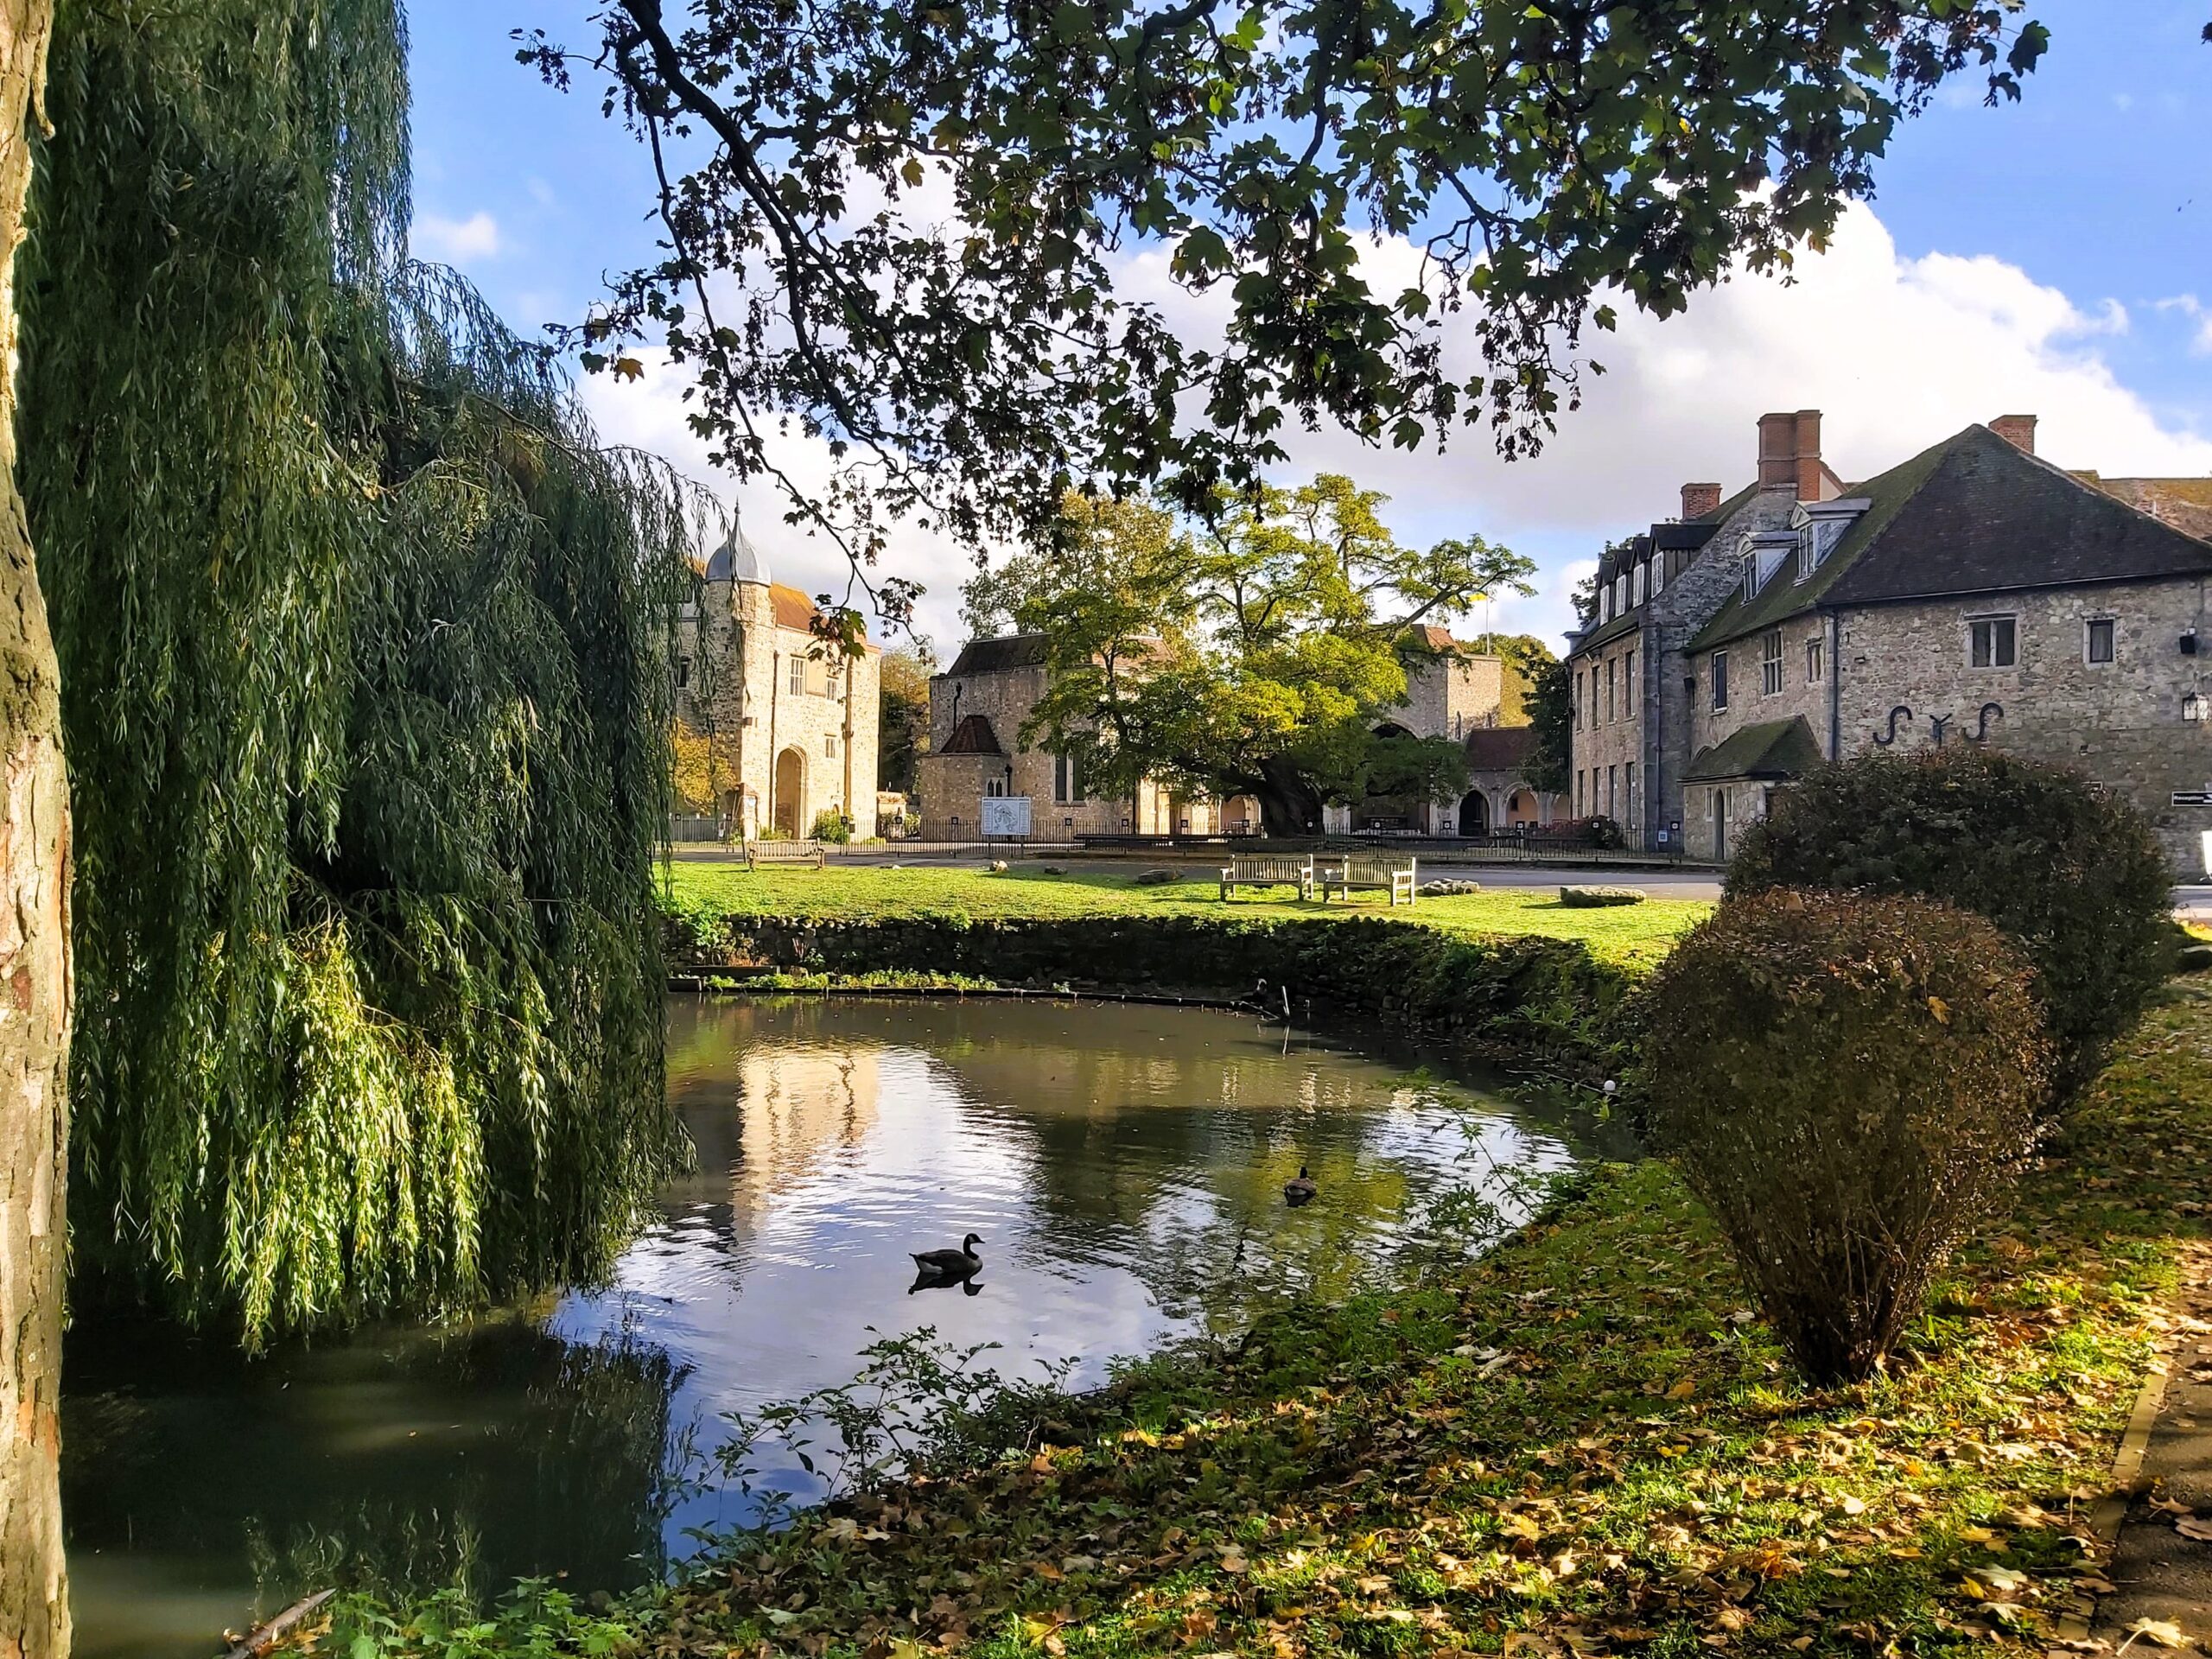 The pond view in The Friars Aylesford Priory, Kent, England